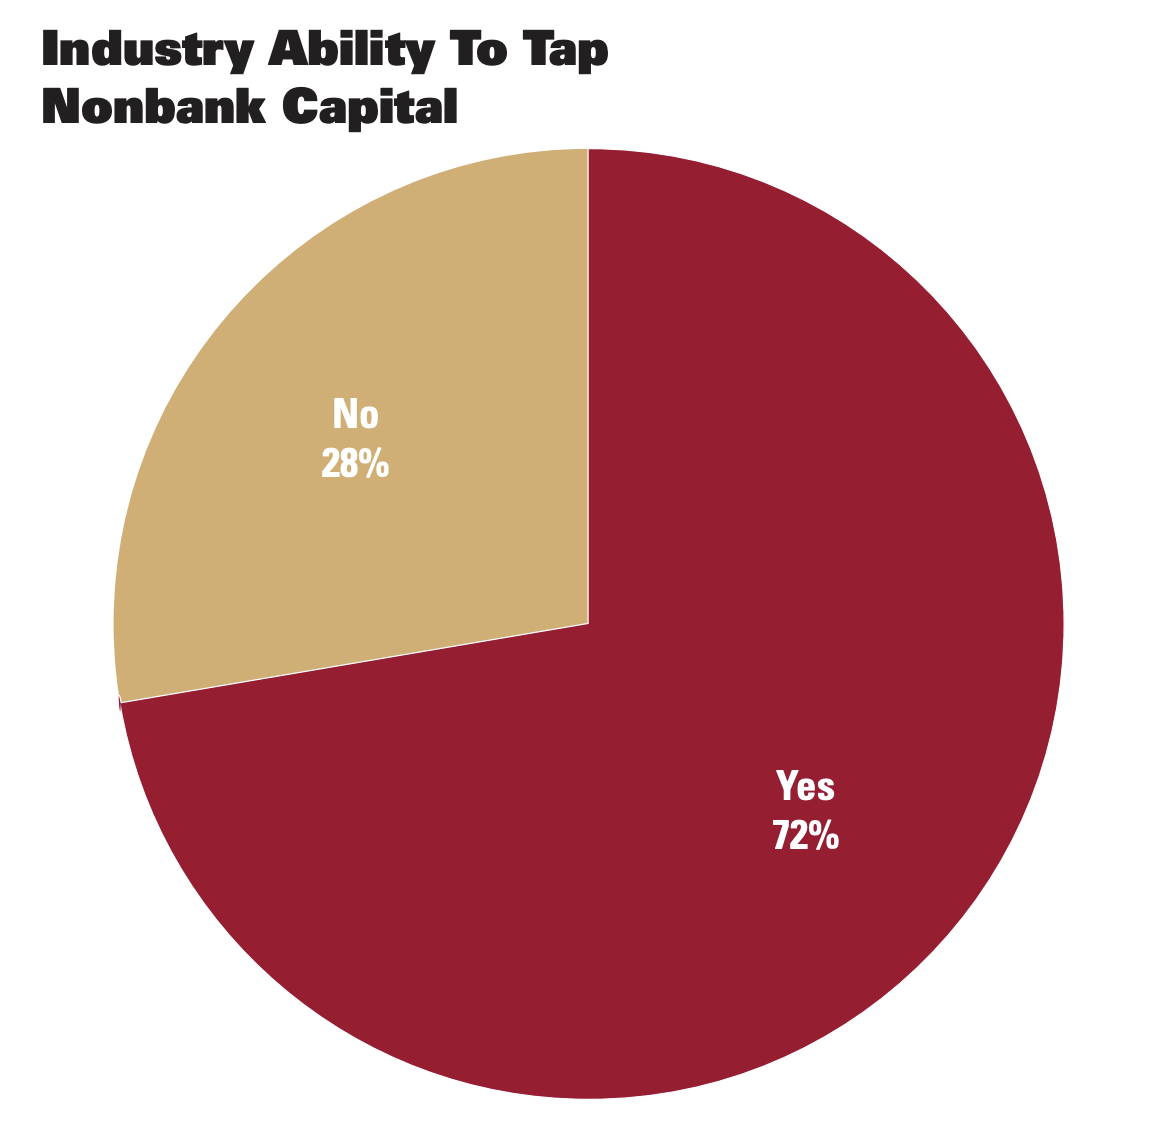 Industry Ability To Tap Nonbank Capital Chart _ Source Federal Reserve Bank of Dallas